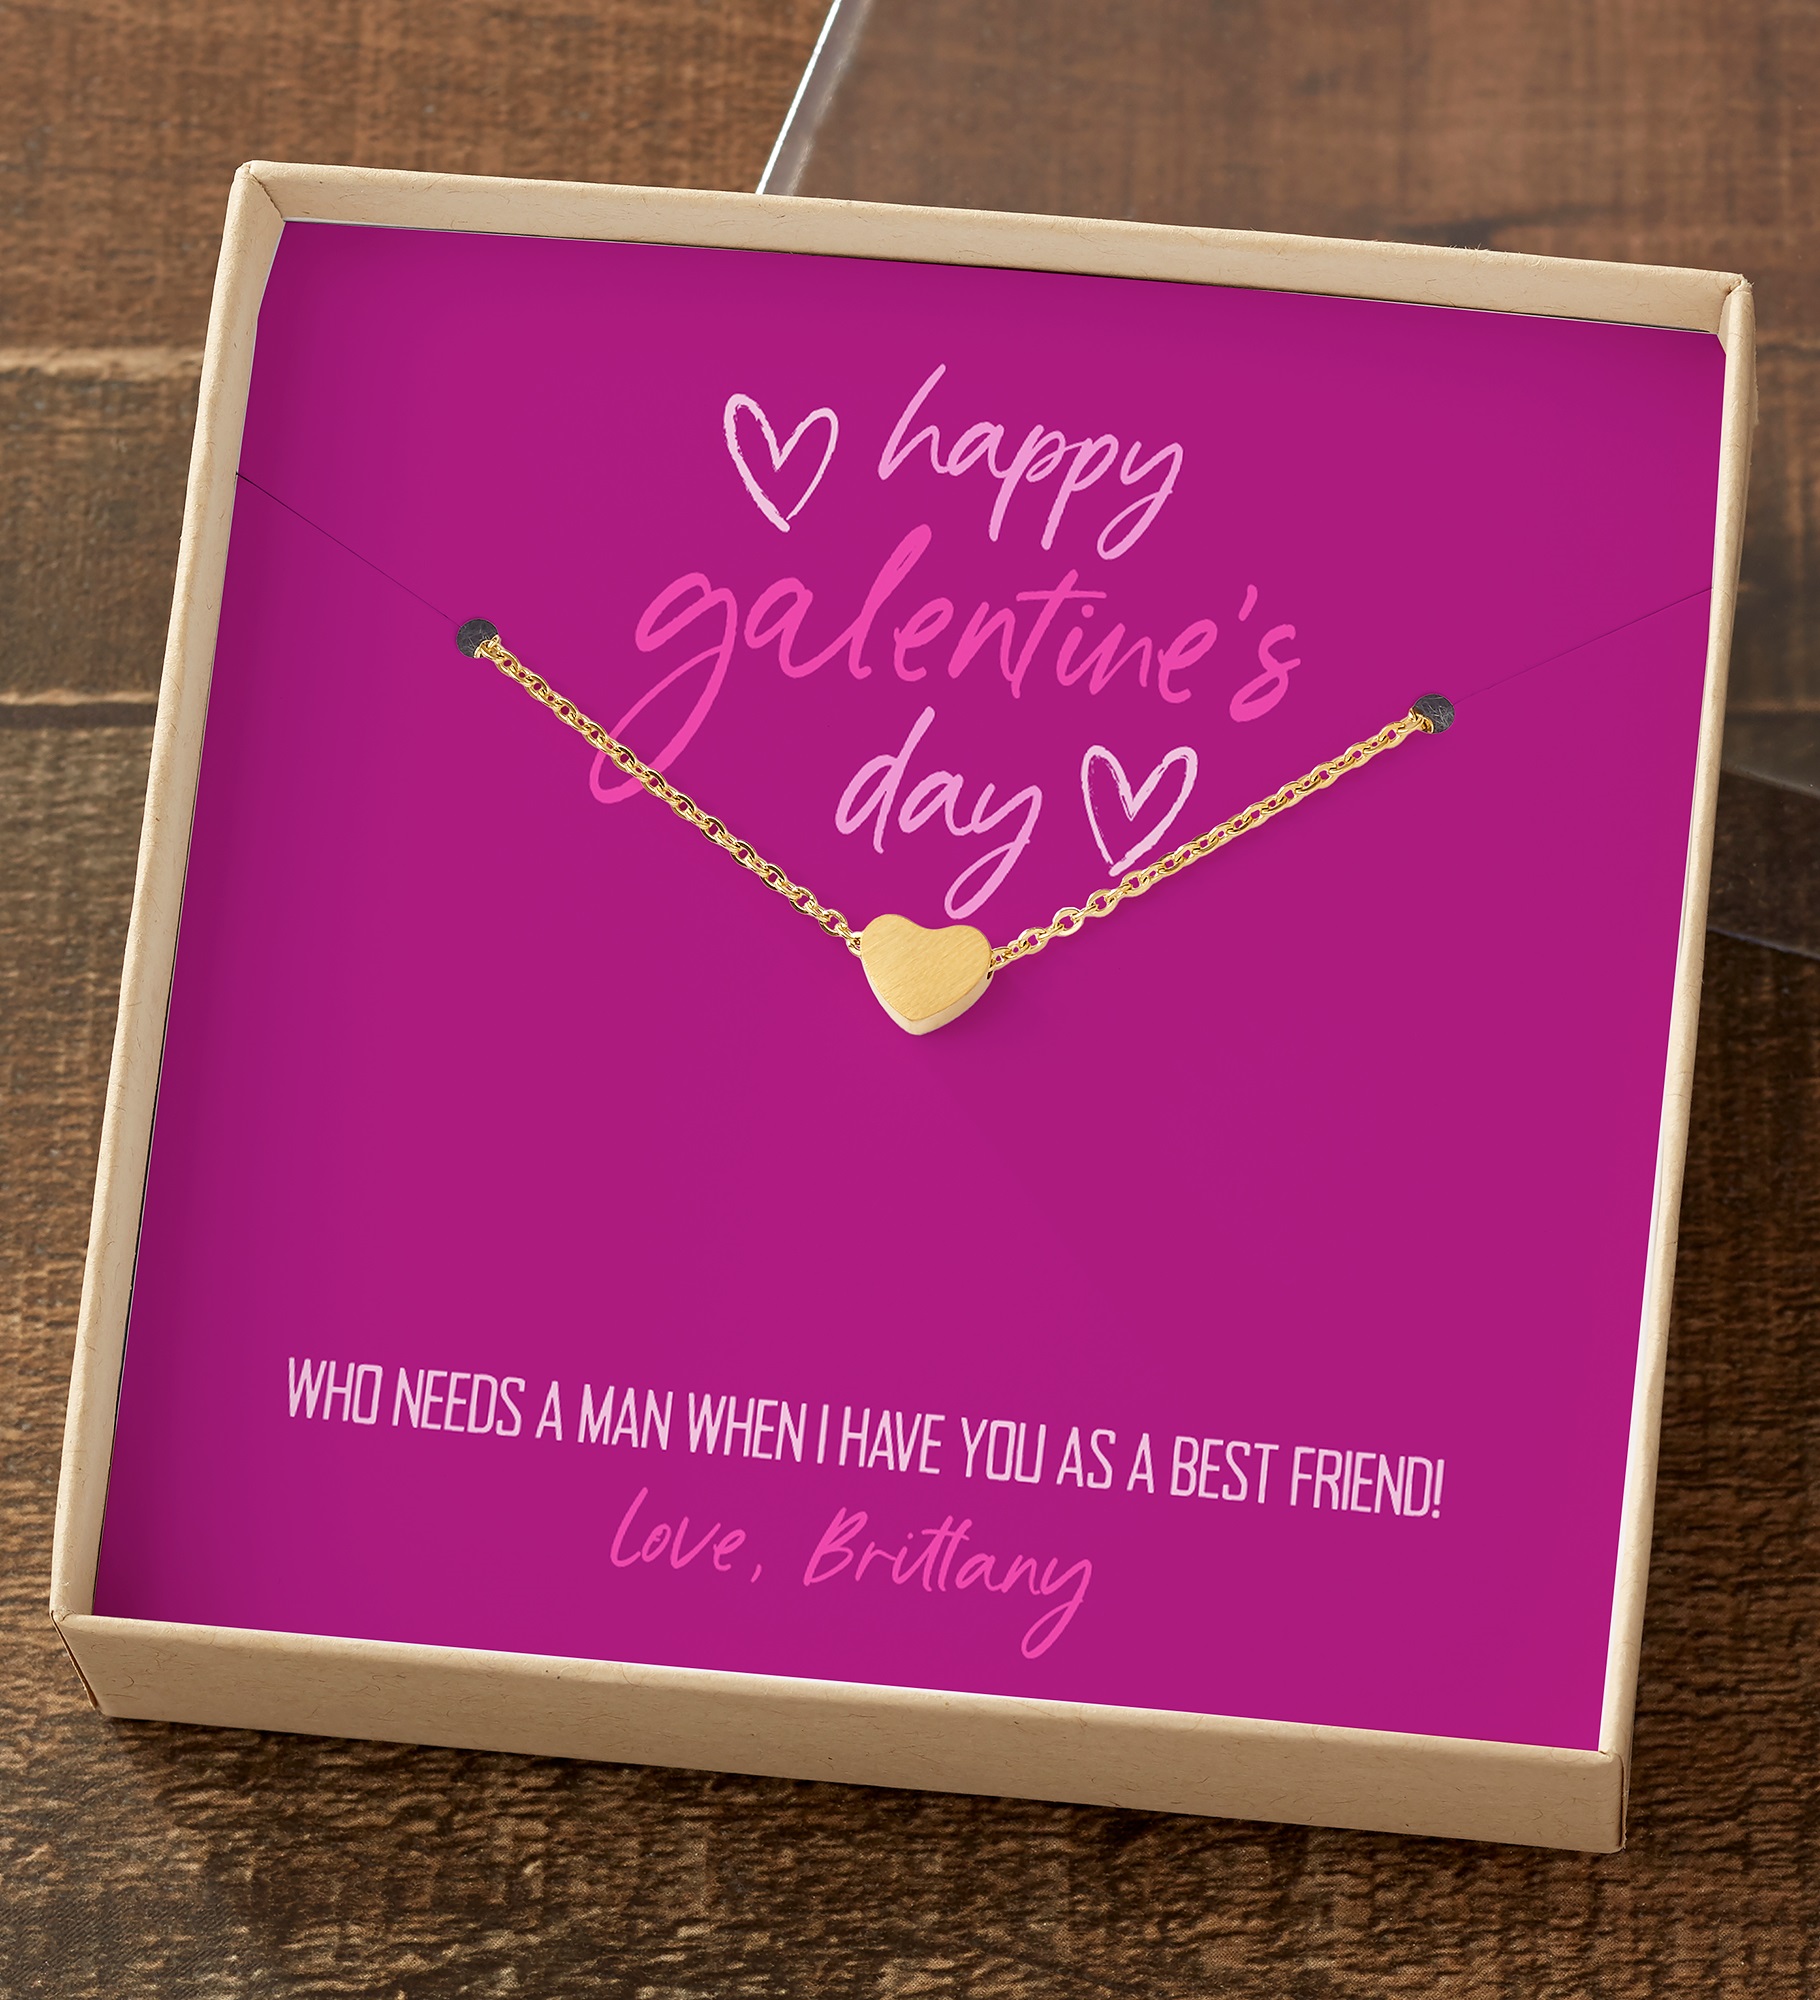 Galentine's Day Necklace Personalized Message Card